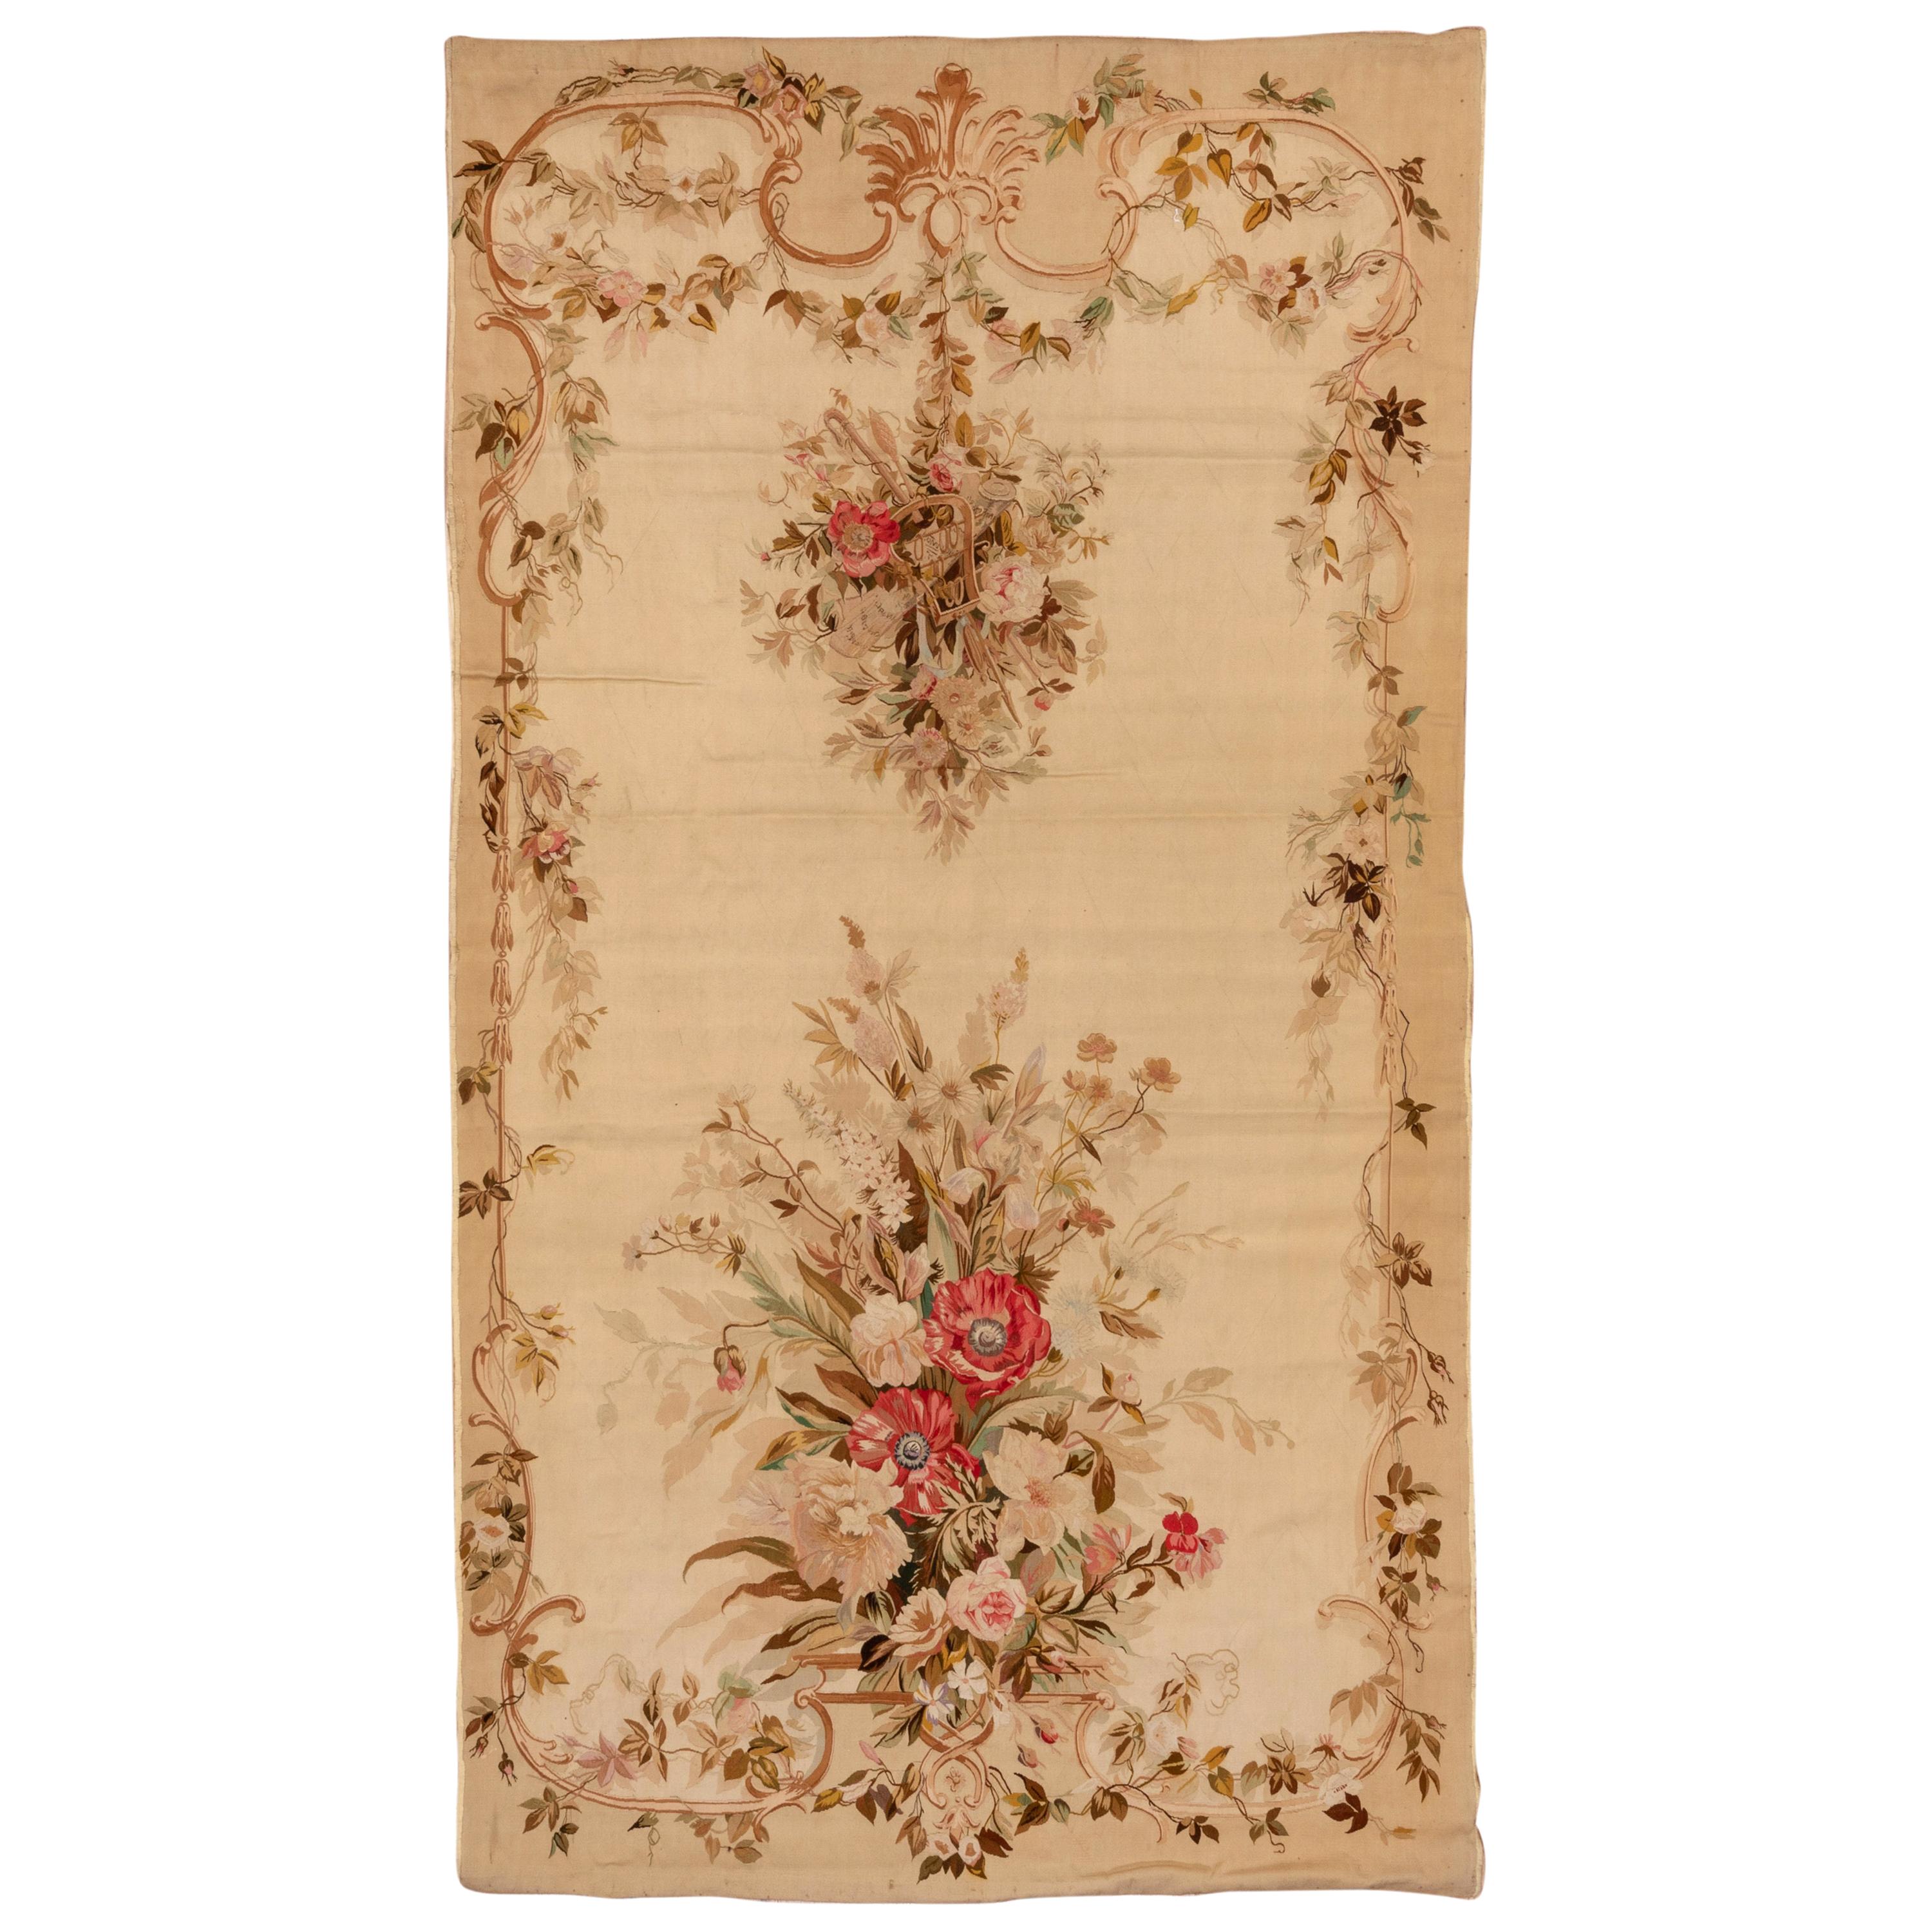 Antique French Aubusson Rug, Rare Size